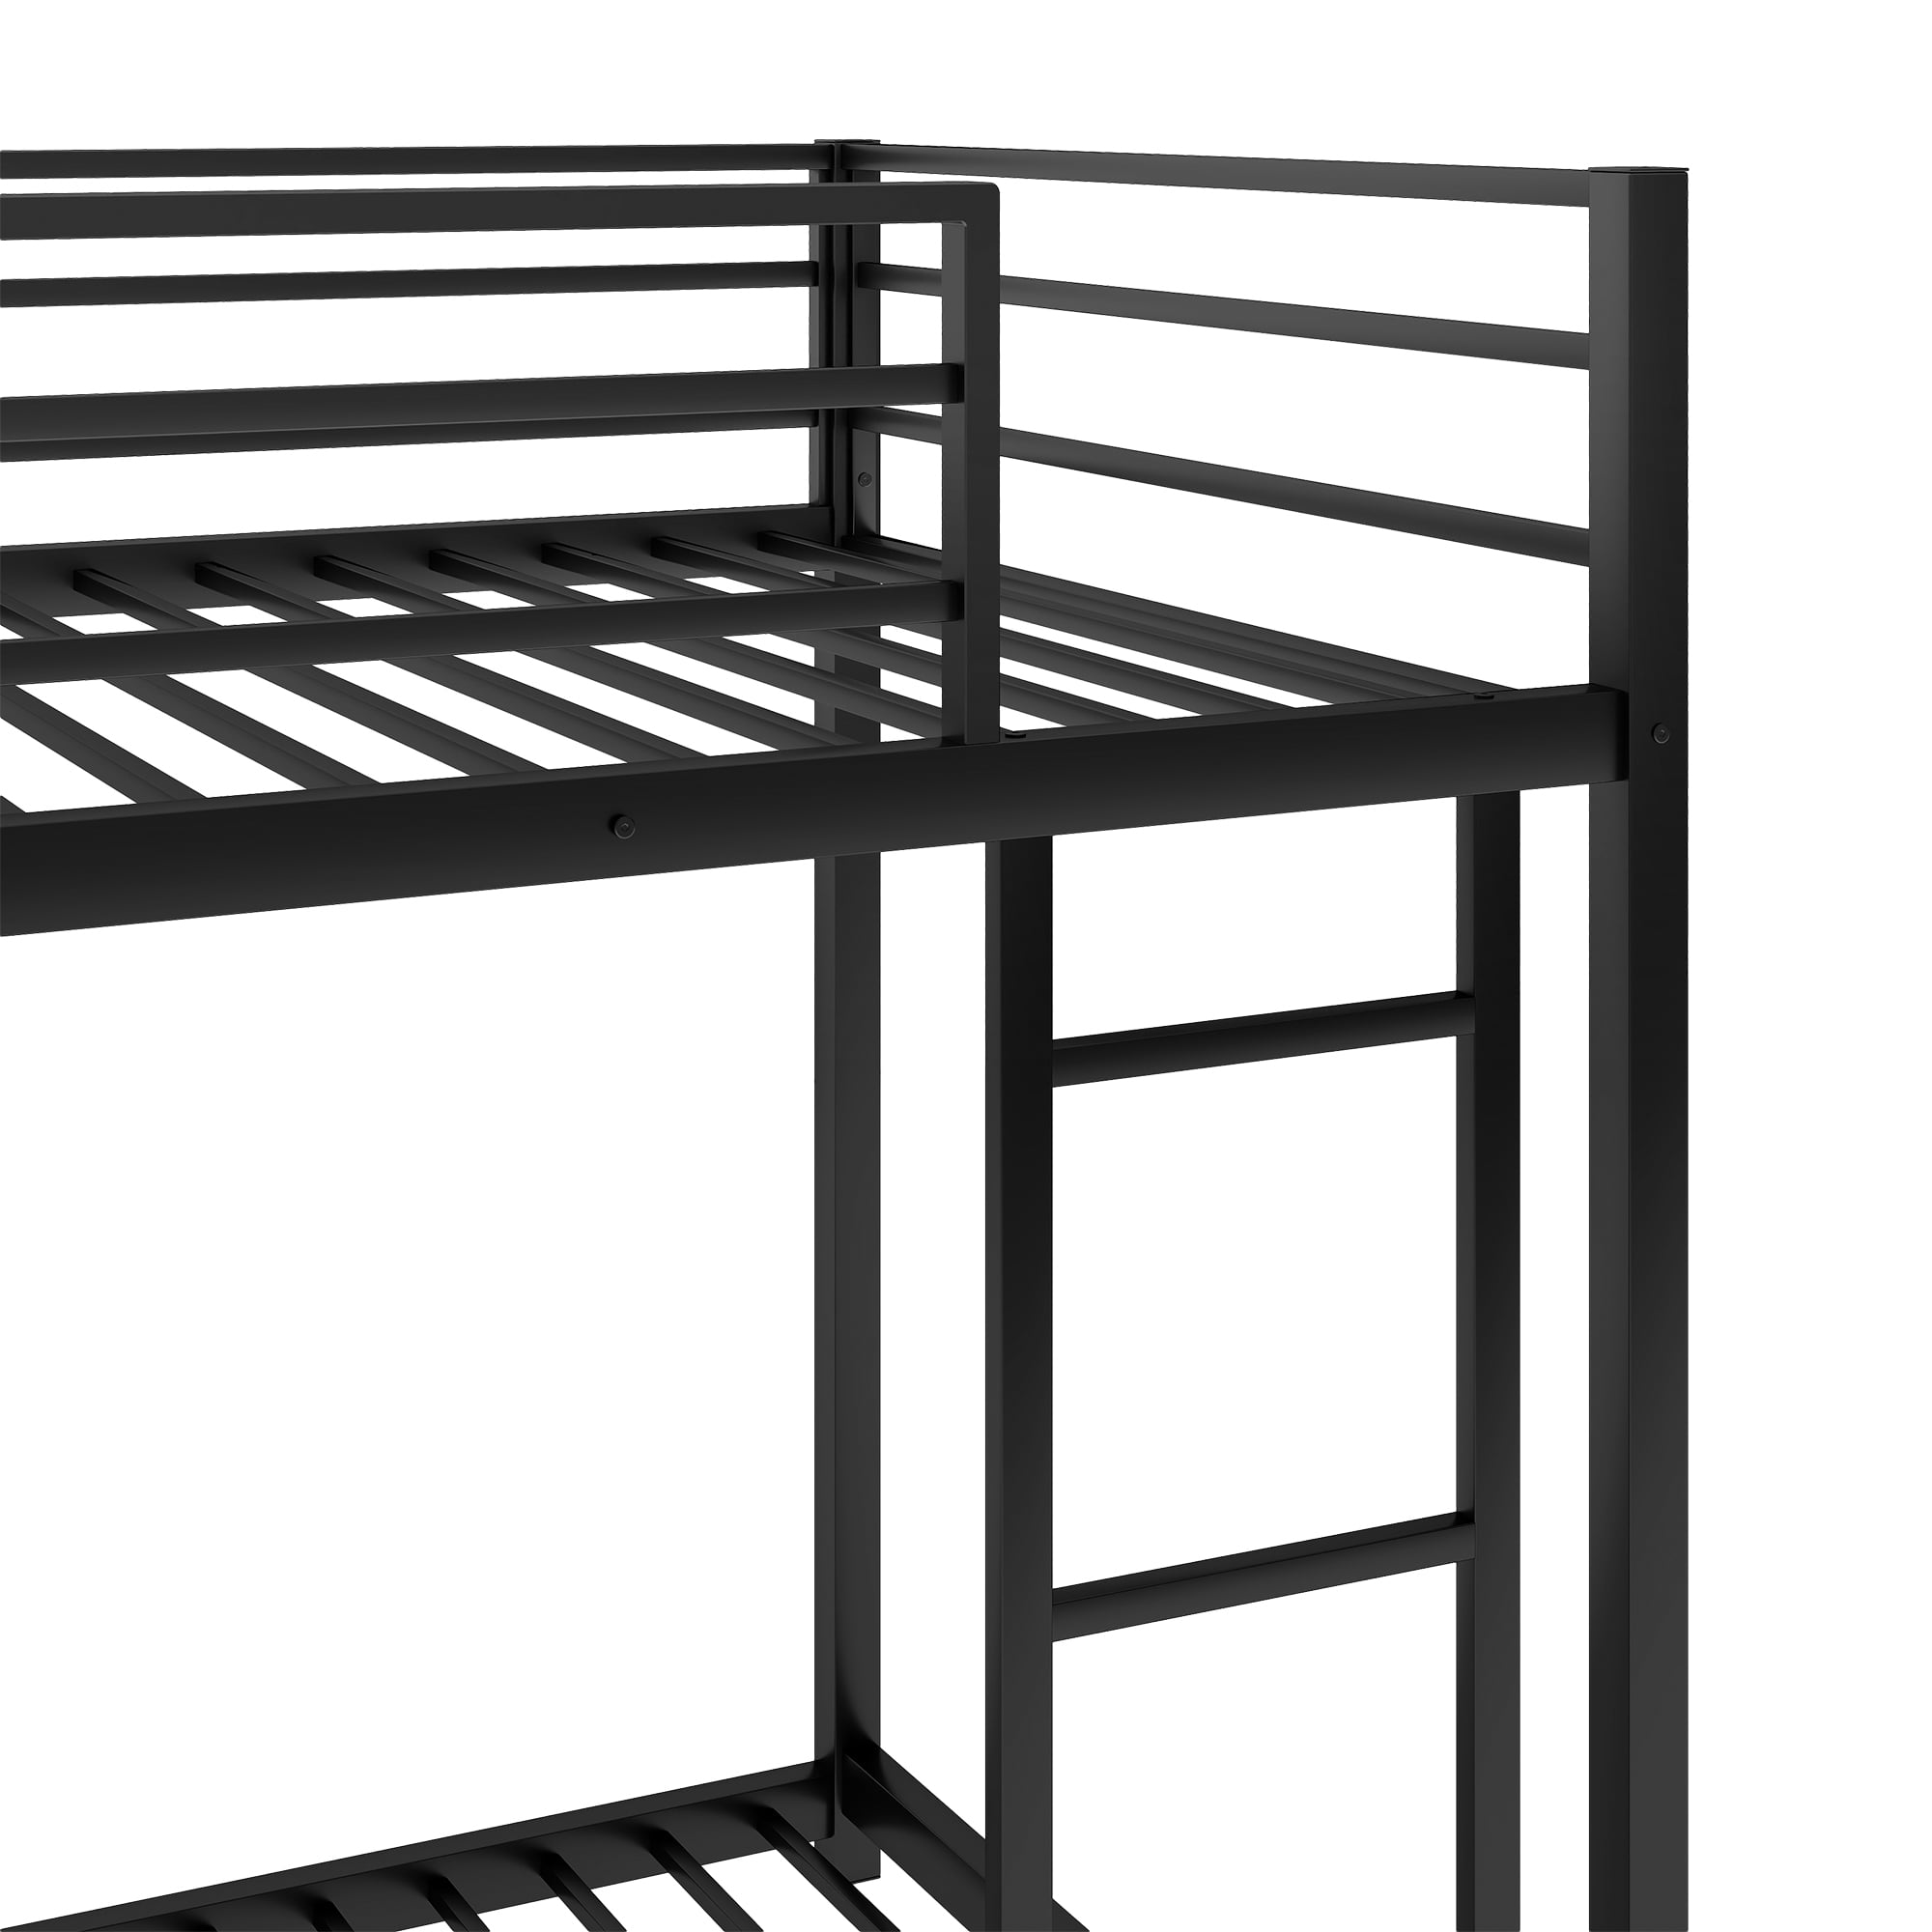 Jump Into Fun Bunk Bed, Twin over Twin Bunk Bed with 42 Sturdy Slats, Safety Guard Rail & Ladder, Metal Bunk Bed for Kids Teens, Low Bunk Bed for Boys Girls Dormitory Bedroom, Black